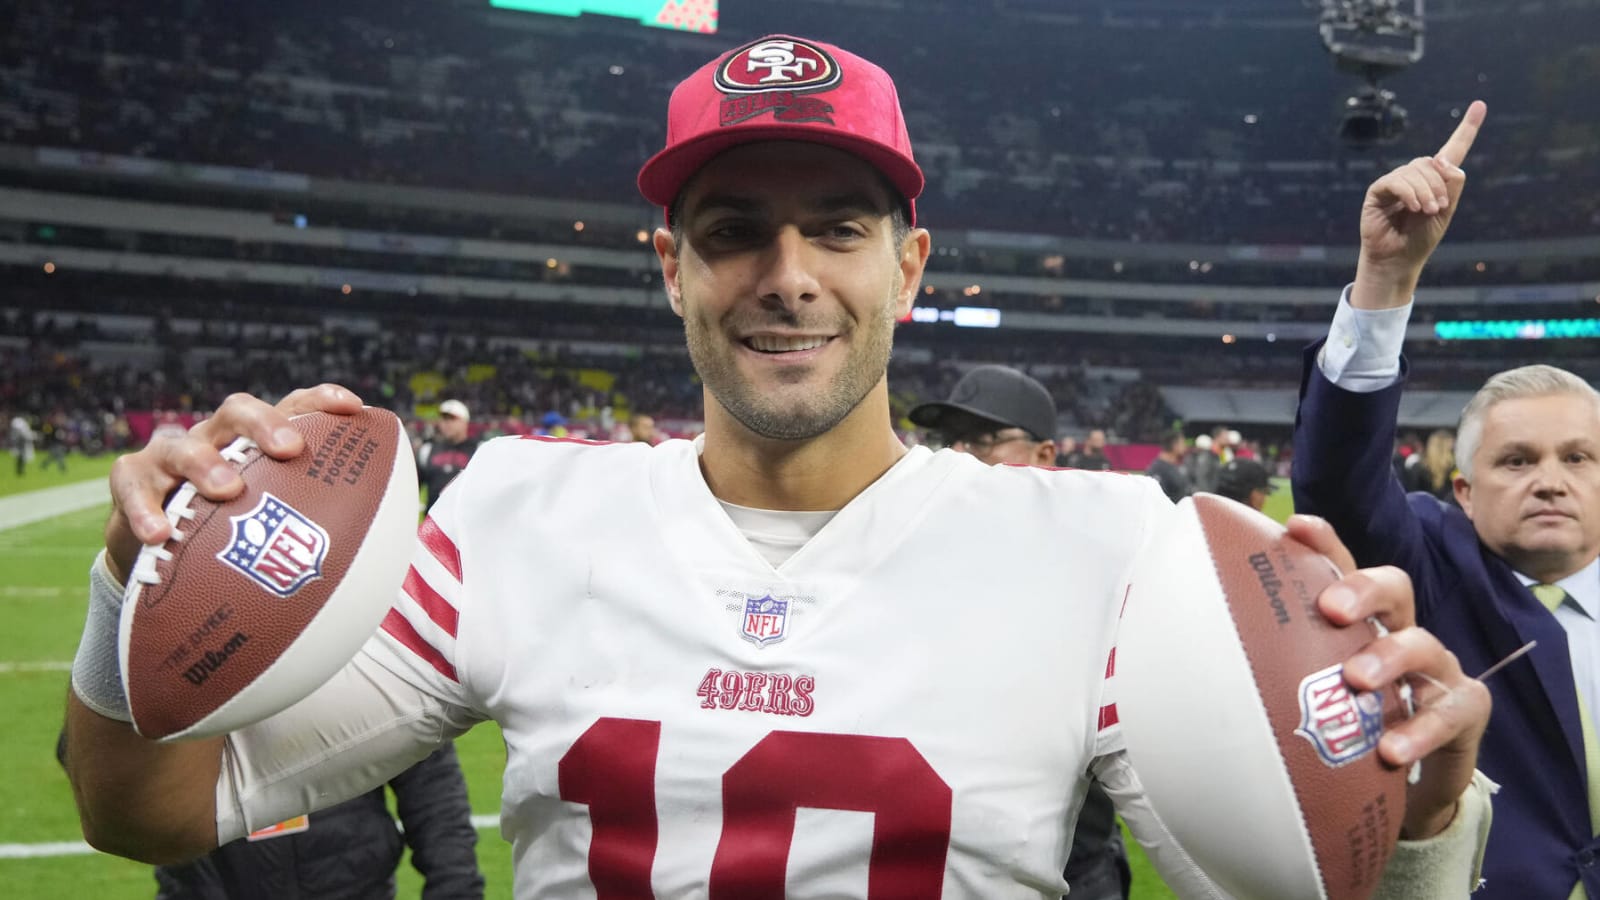 Insider links Jets with 49ers' Jimmy Garoppolo over Packers' Aaron Rodgers